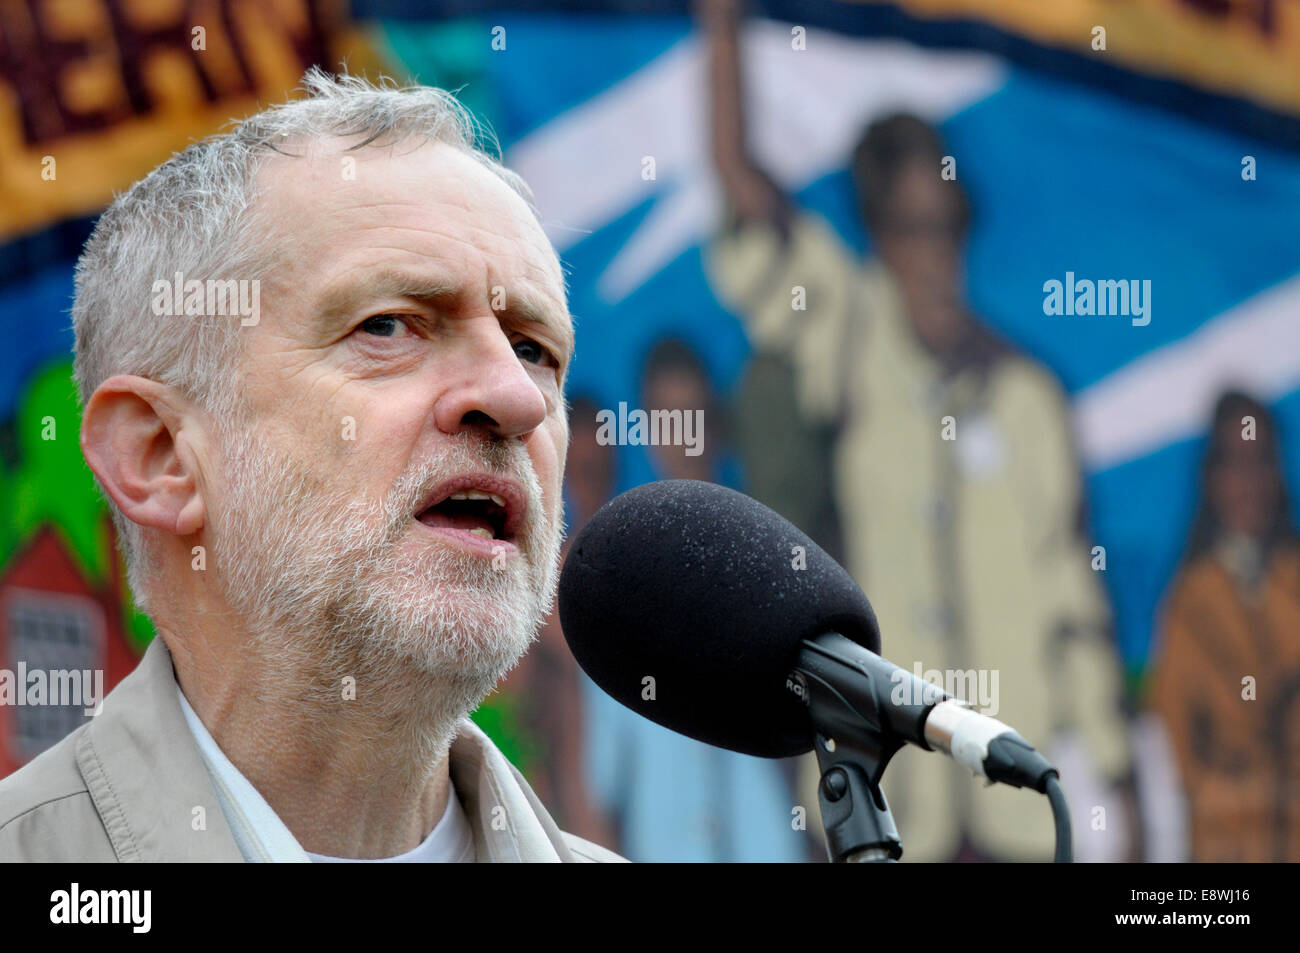 Jeremy Corbyn MP (Labour member for Islington North) at the May Day rally in Trafalgar Square, London, 2014 Stock Photo